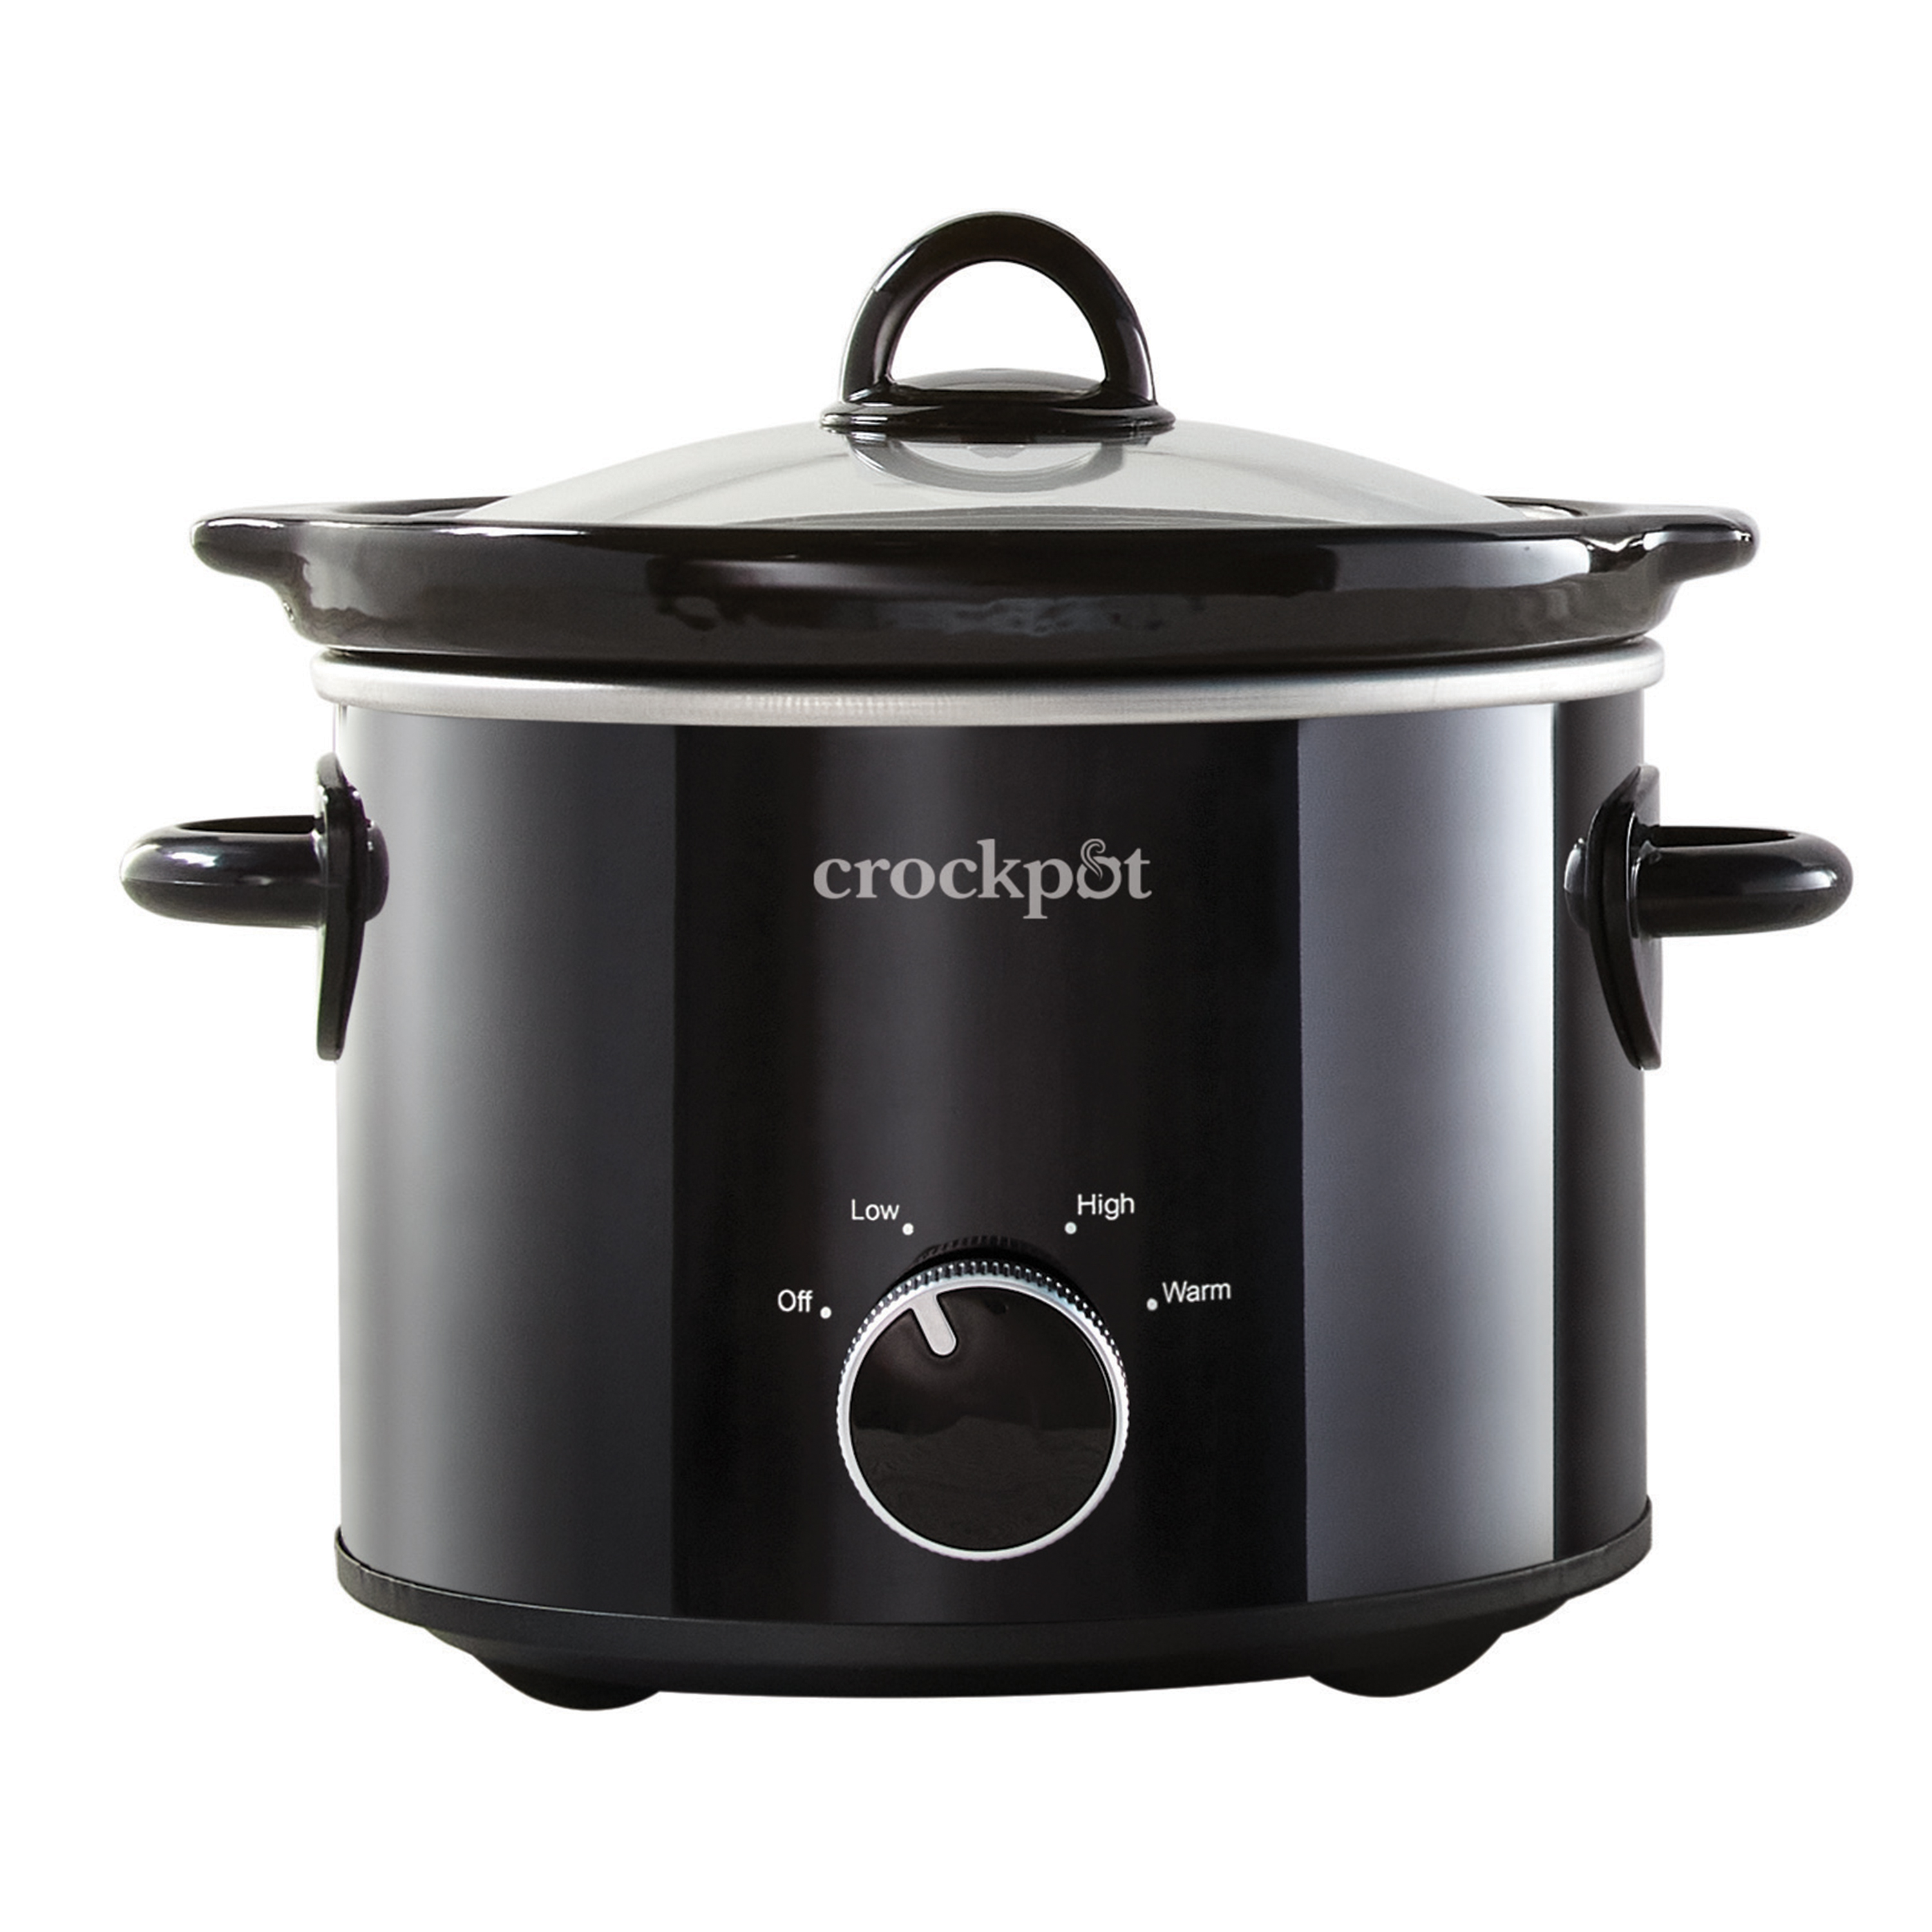 Crockpot™ 2-Quart Classic Slow Cooker, Small Slow Cooker, Black - image 1 of 5